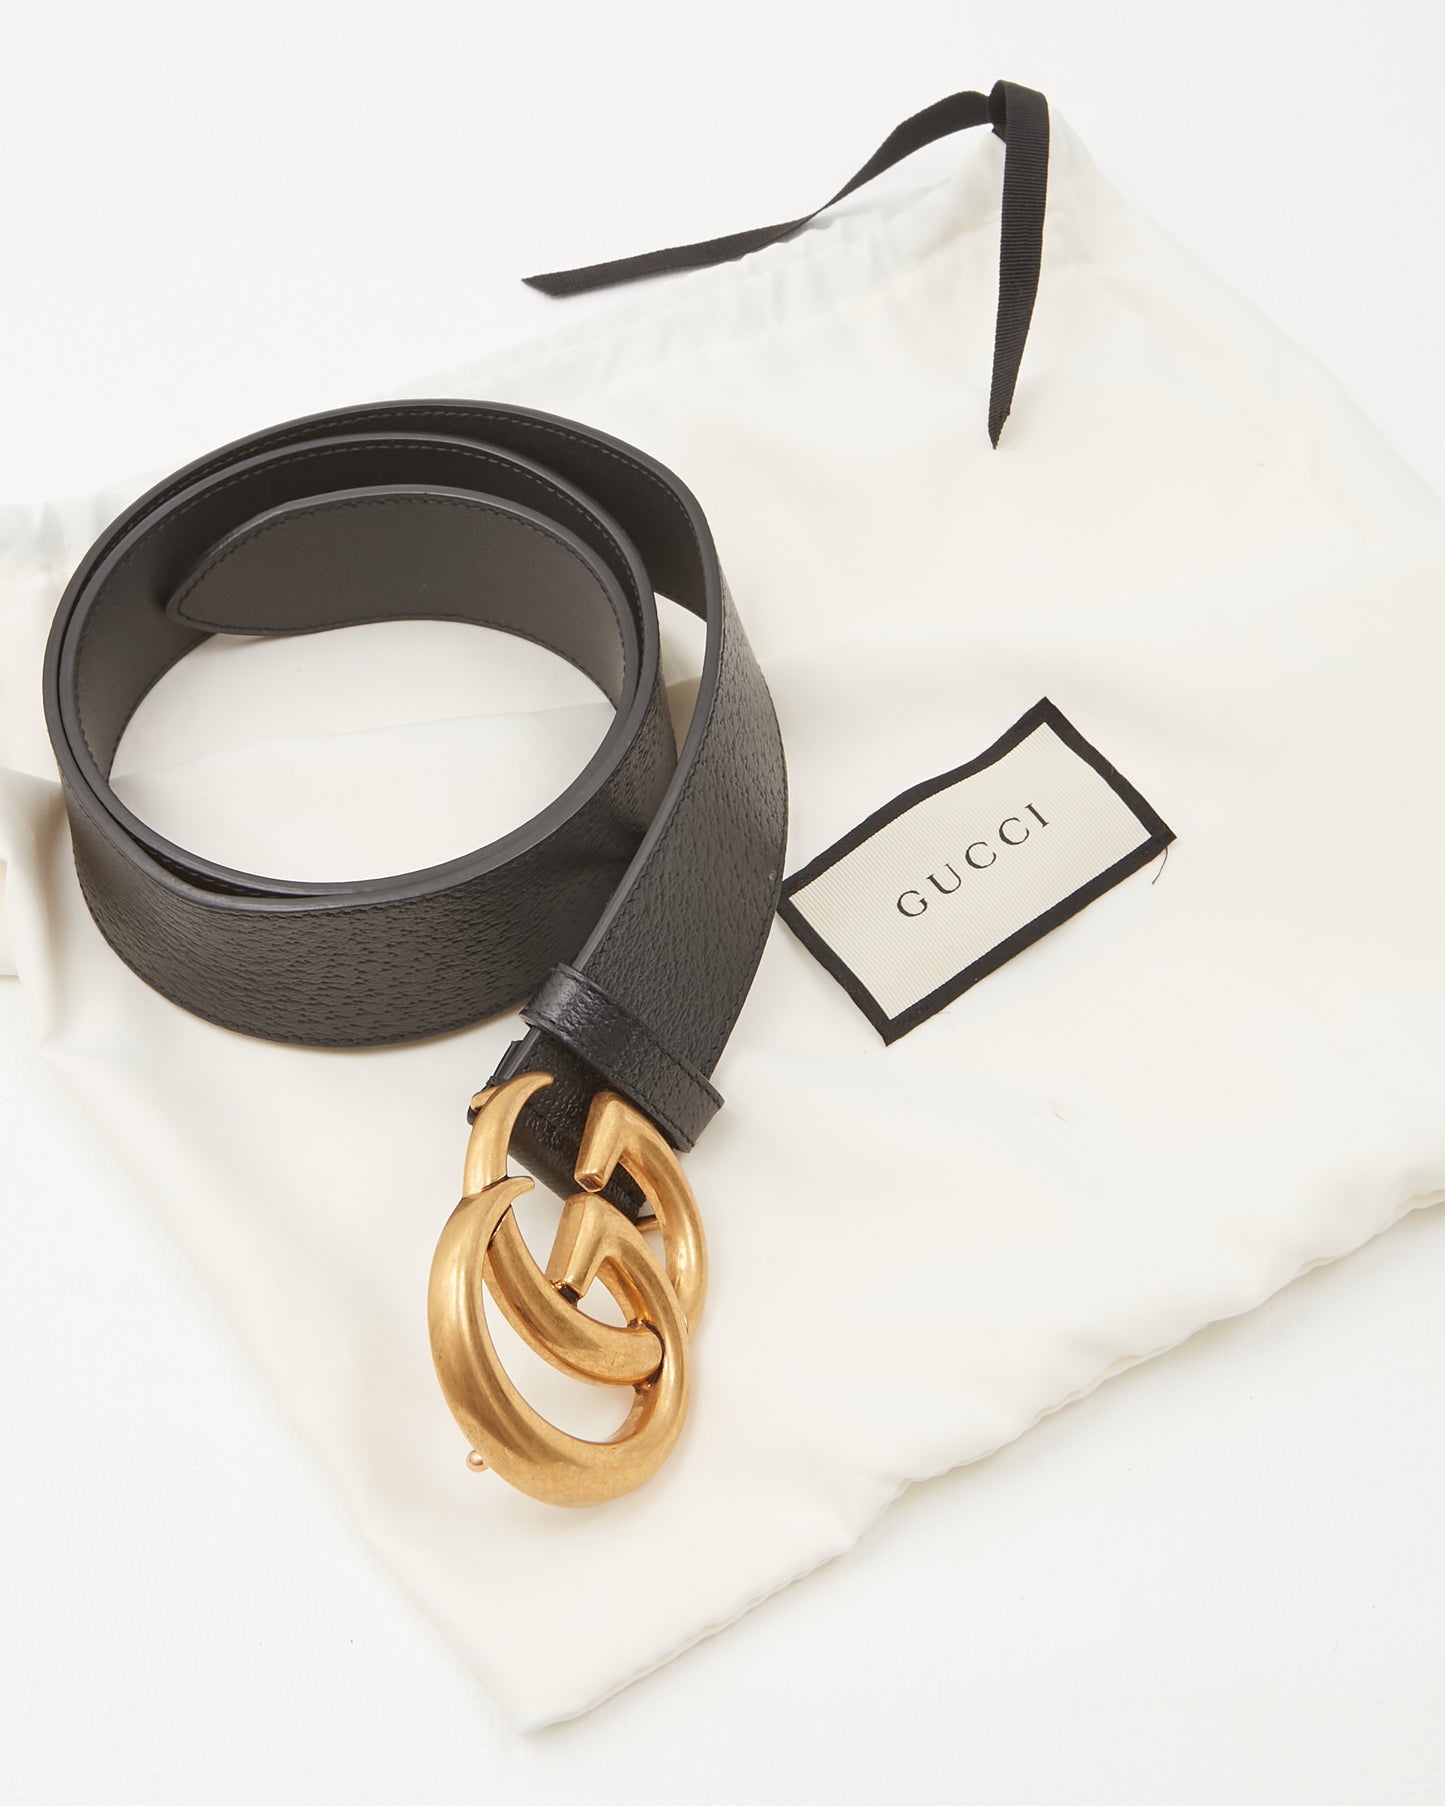 Gucci Black Leather GG Marmont Belt - 85/34